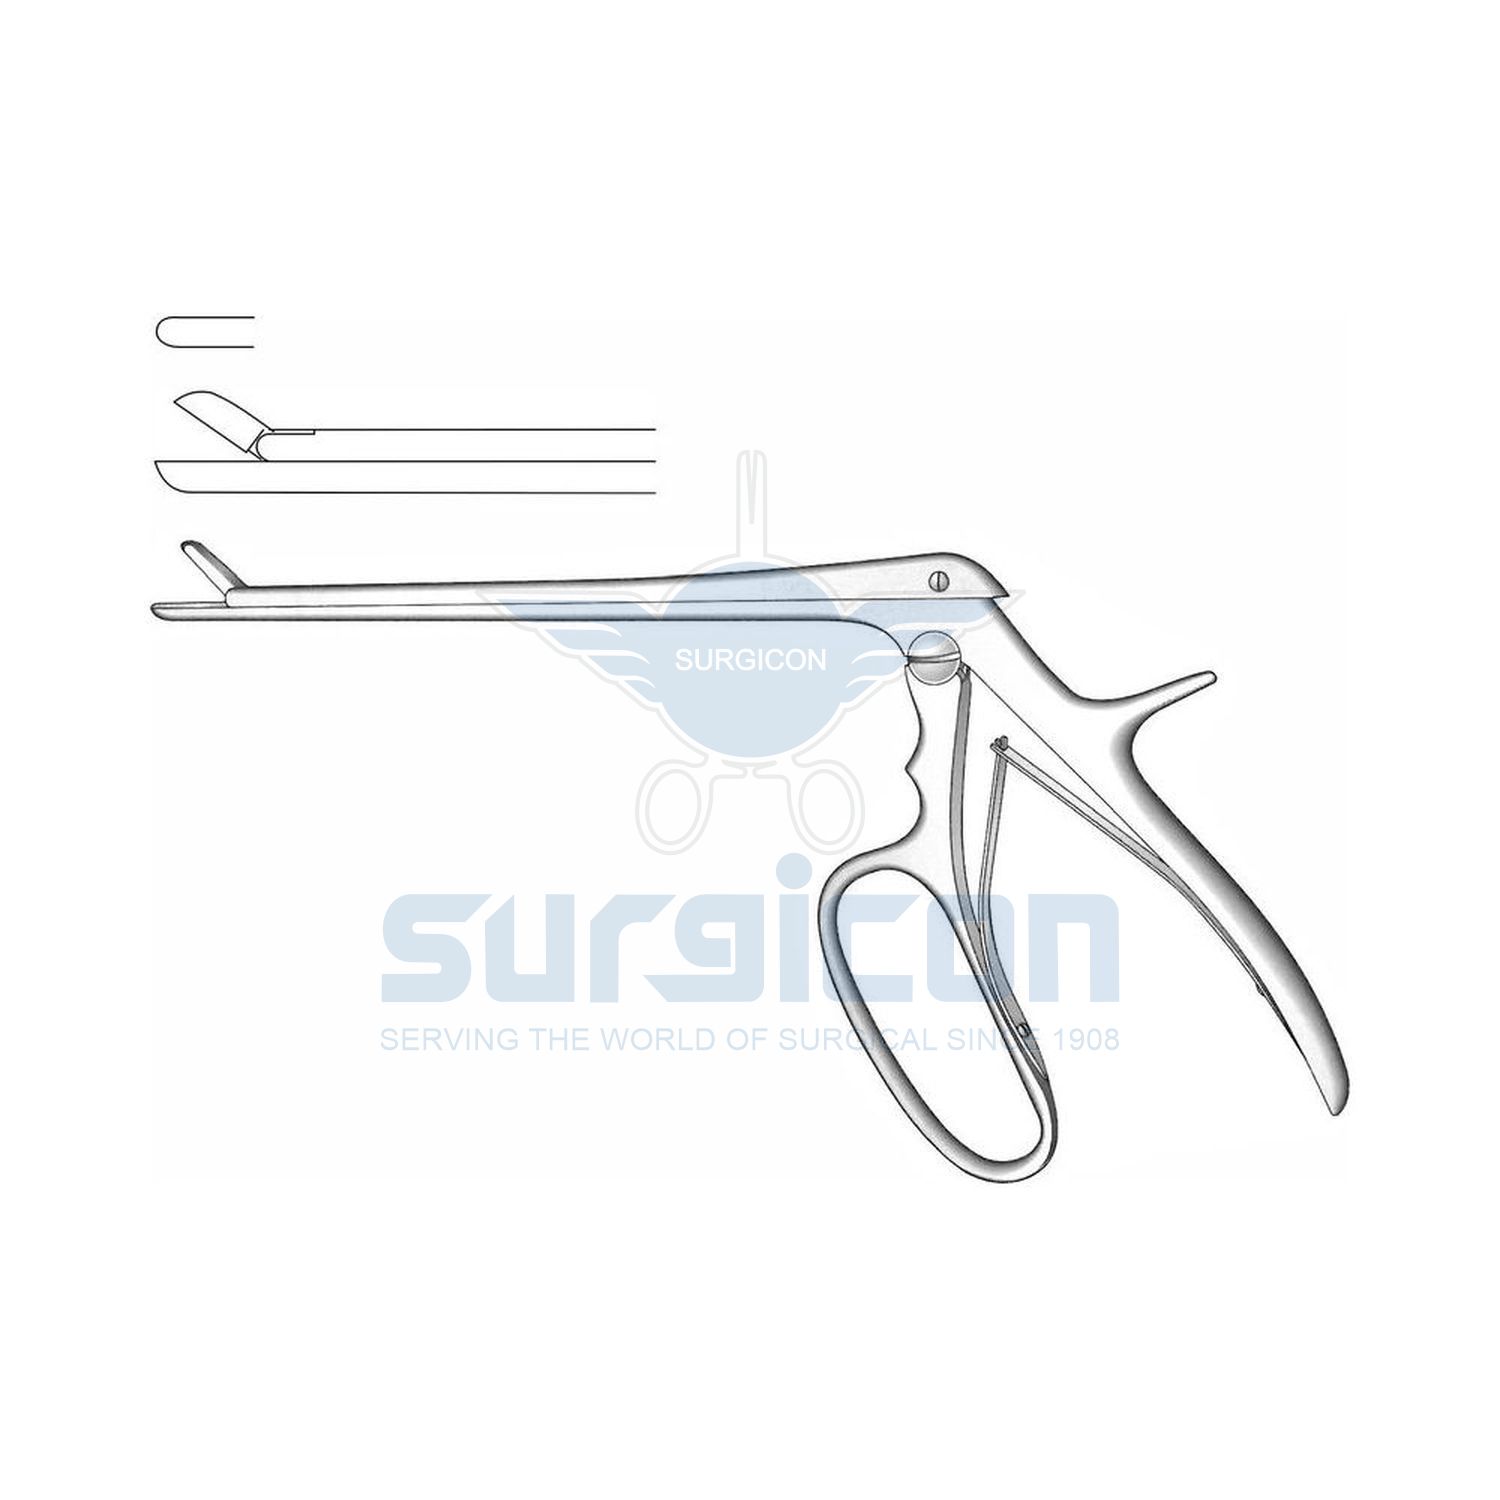 Ferris-Smith-Chusing-Punches-and-Rongeur-Forcep-J-32-1086